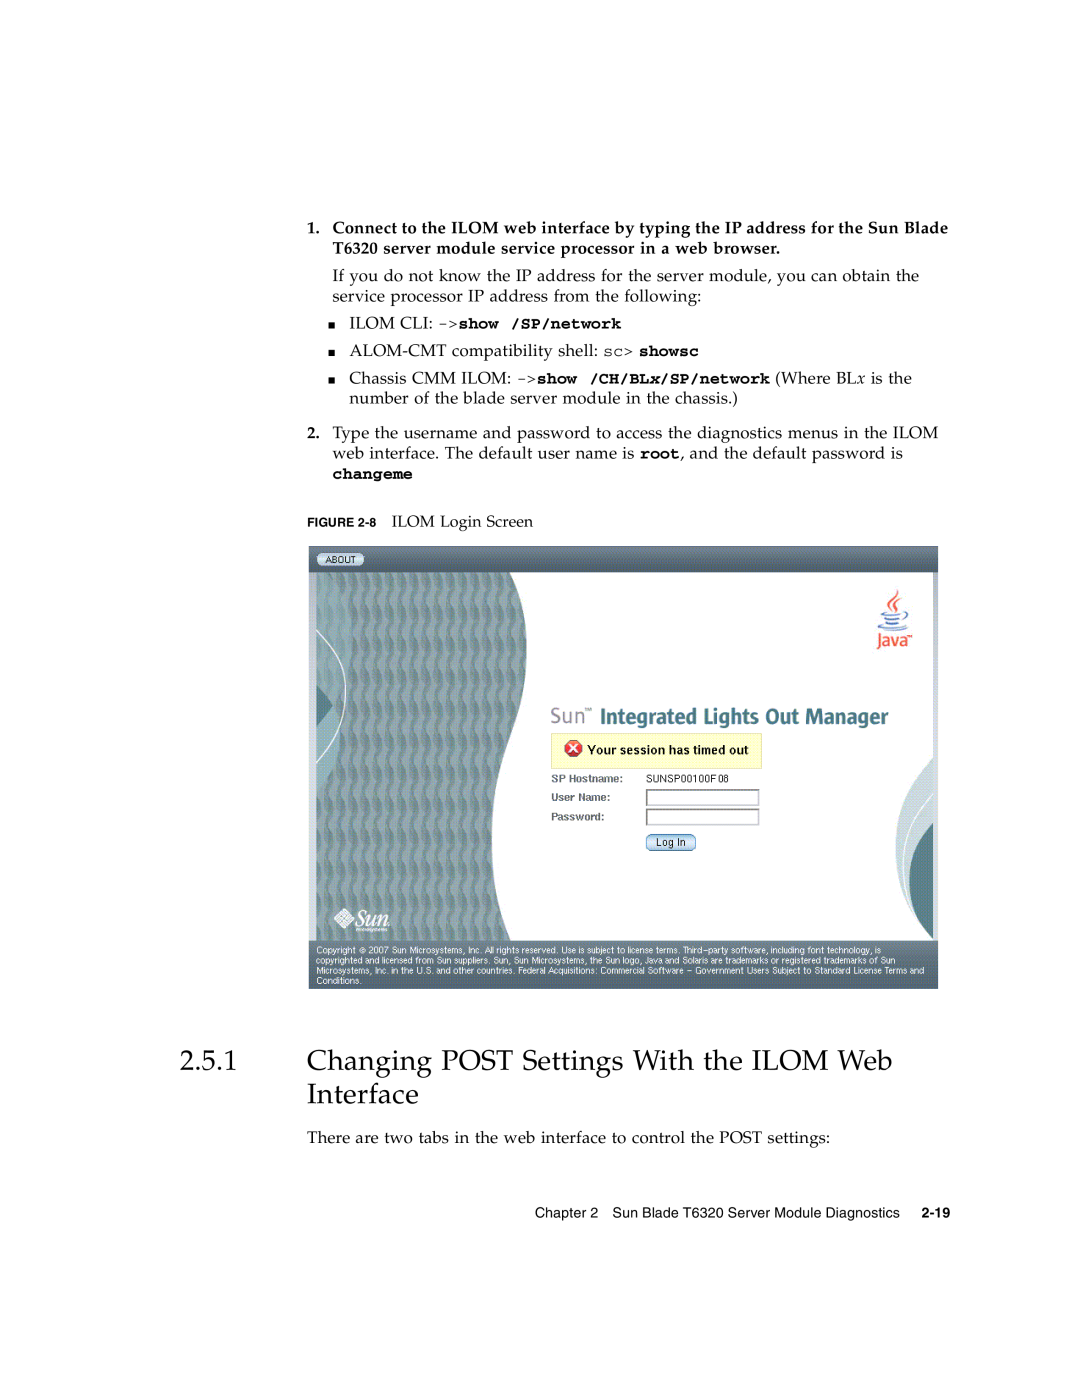 Sun Microsystems T6320 service manual Changing POST Settings With the ILOM Web Interface, ILOM CLI -show /SP/network 